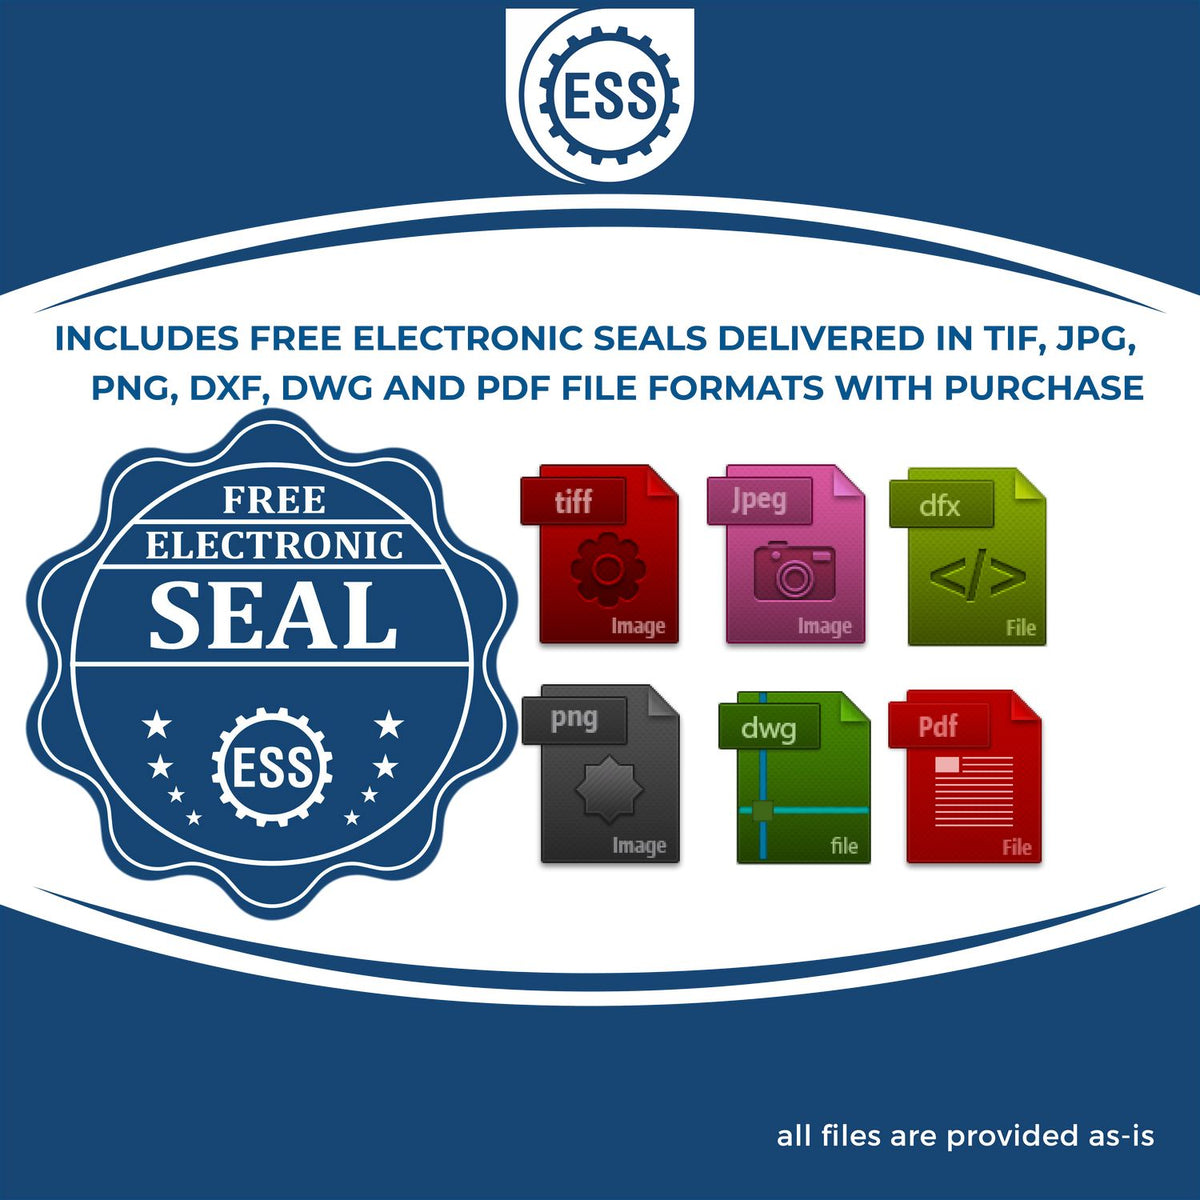 An infographic for the free electronic seal for the Heavy Duty Cast Iron Massachusetts Engineer Seal Embosser illustrating the different file type icons such as DXF, DWG, TIF, JPG and PNG.